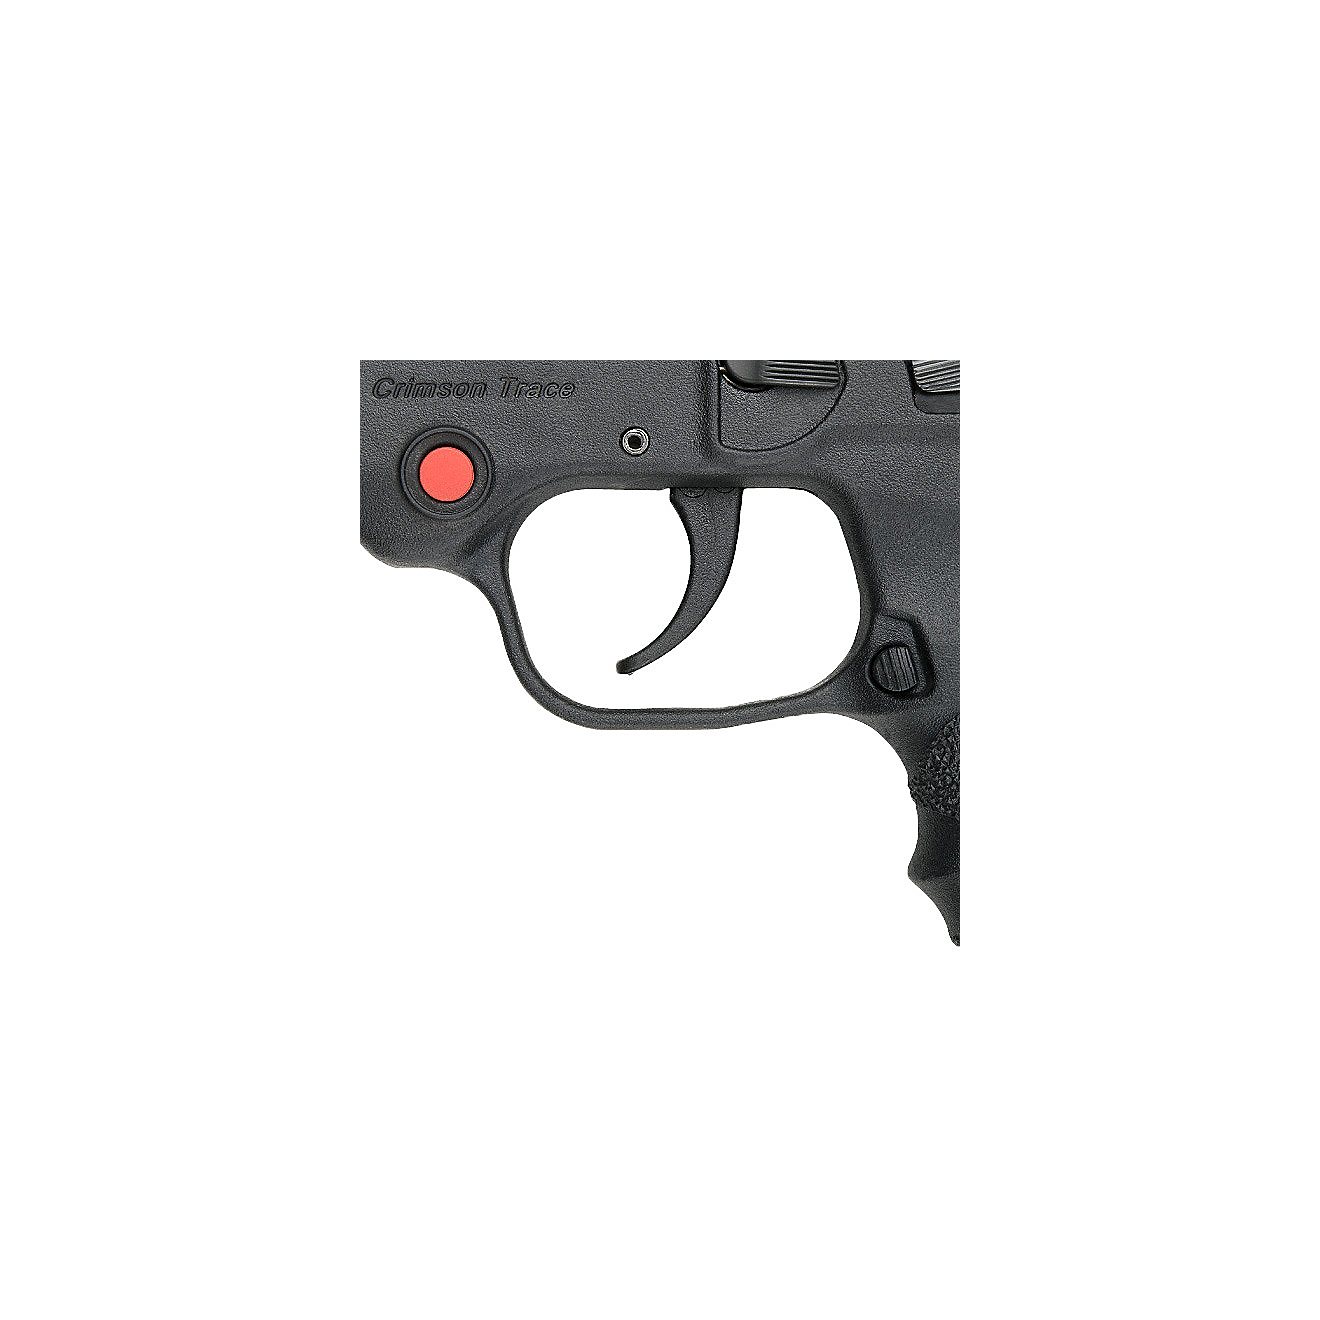 Smith & Wesson M&P Bodyguard Crimson Trace RED Laser 380 ACP Sub-Compact 6-Round Pistol                                          - view number 3